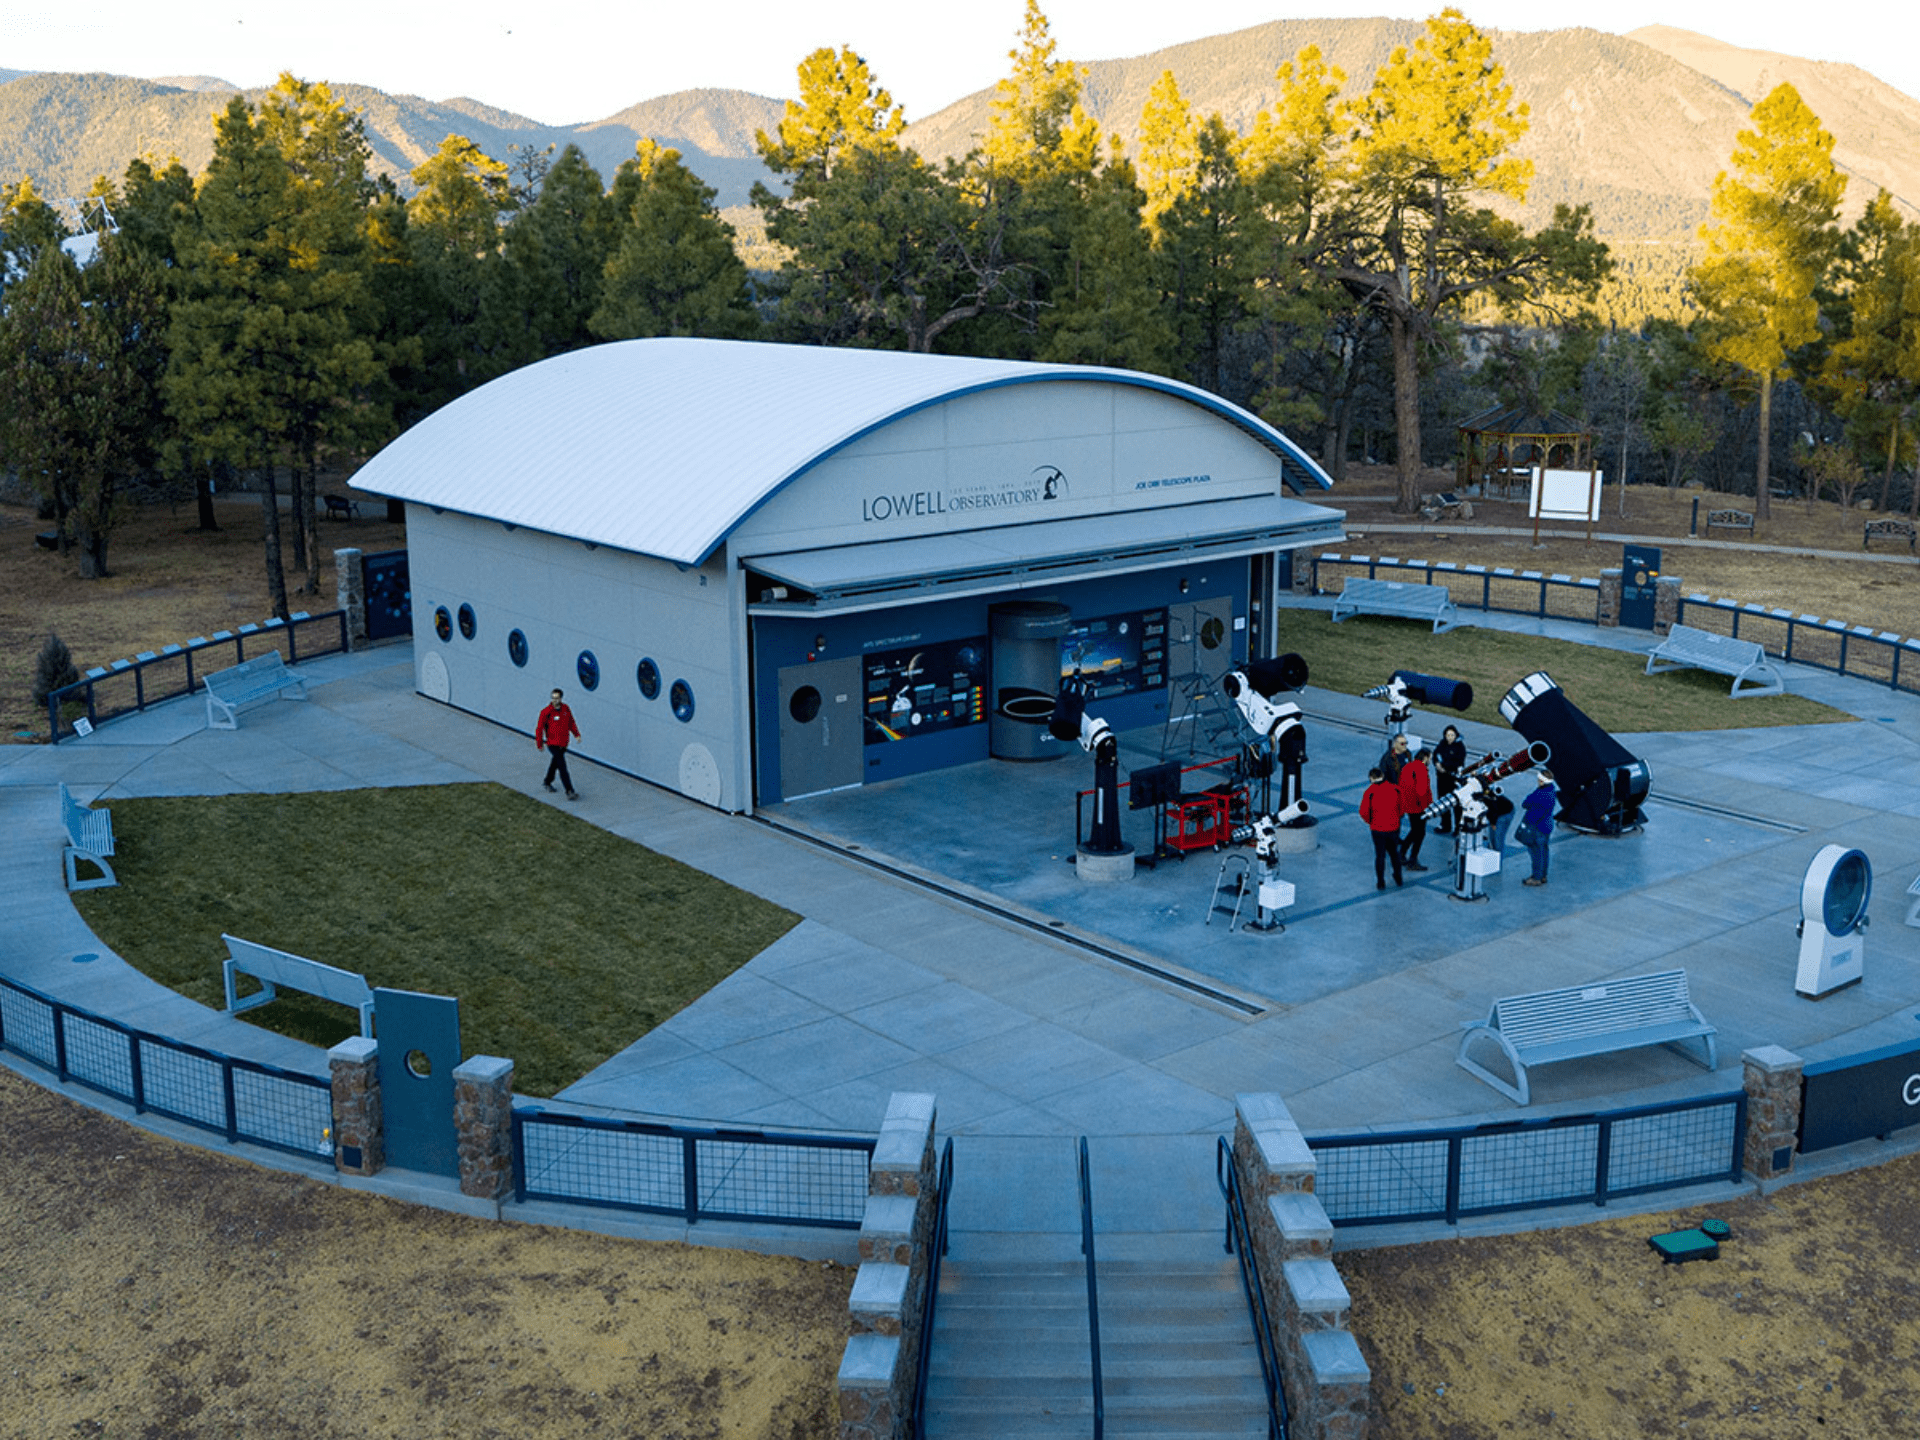 Lowell observatory with open deck